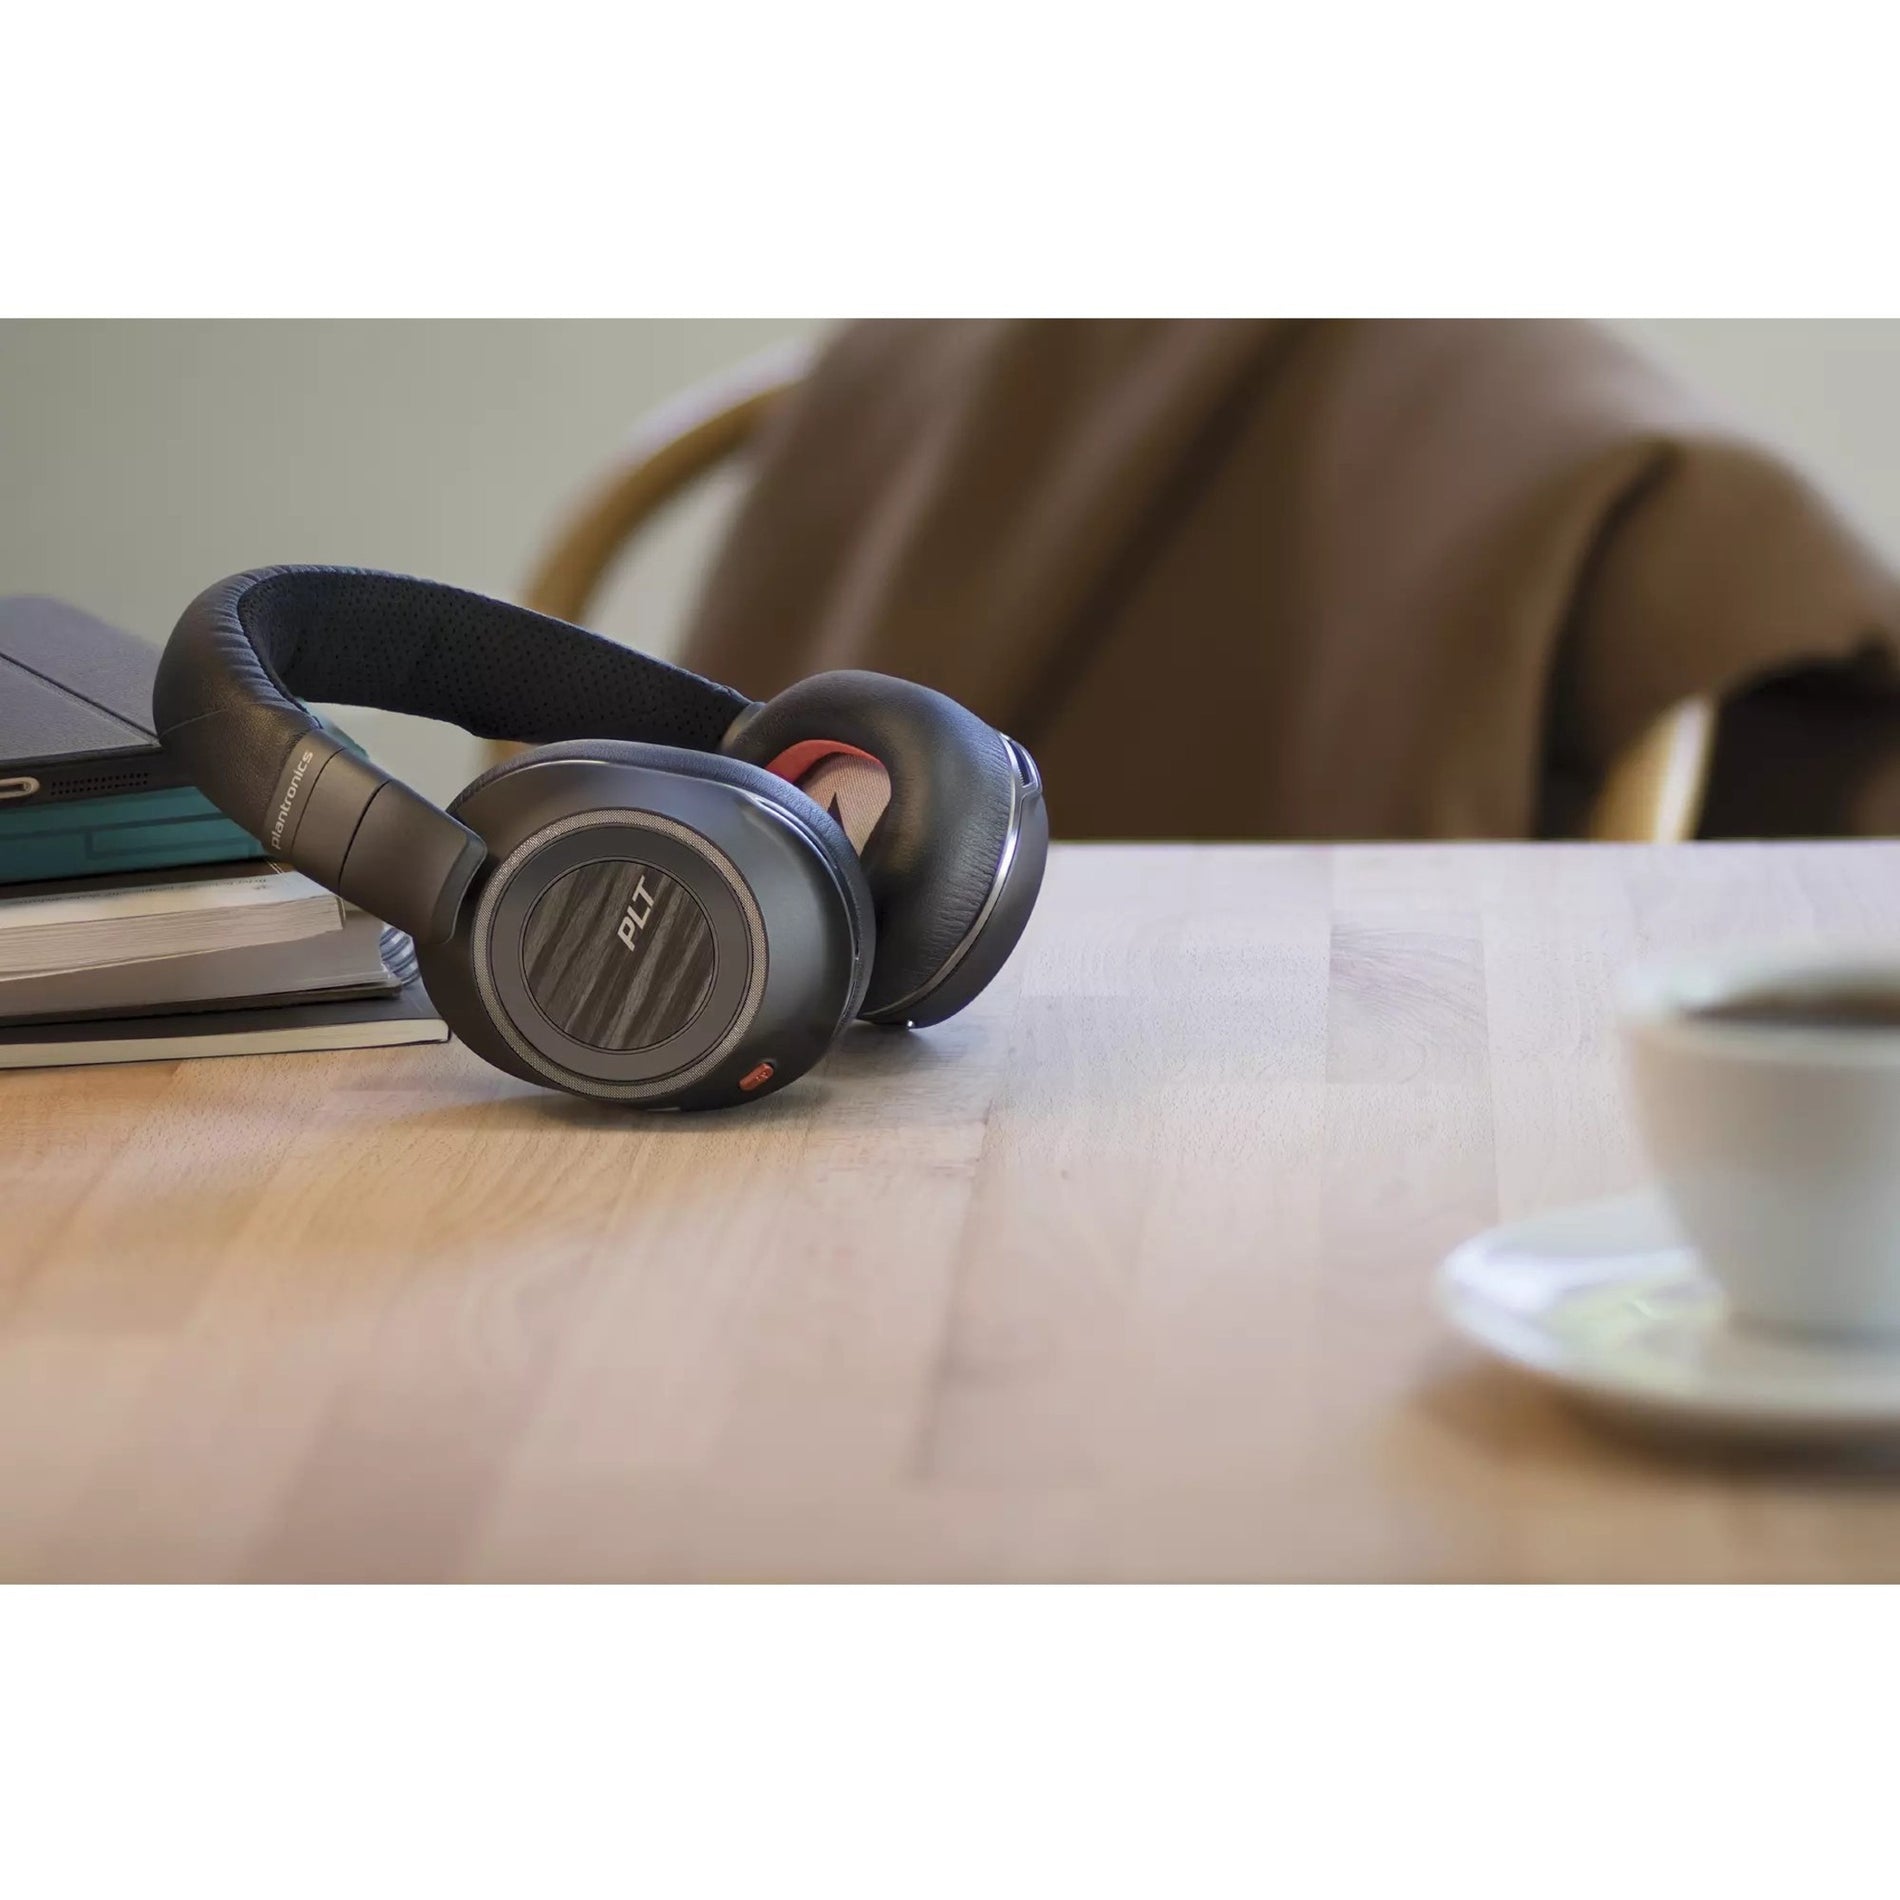 Plantronics Voyager 8200 UC Stereo Bluetooth Headset With Active Noise Canceling [Discontinued]